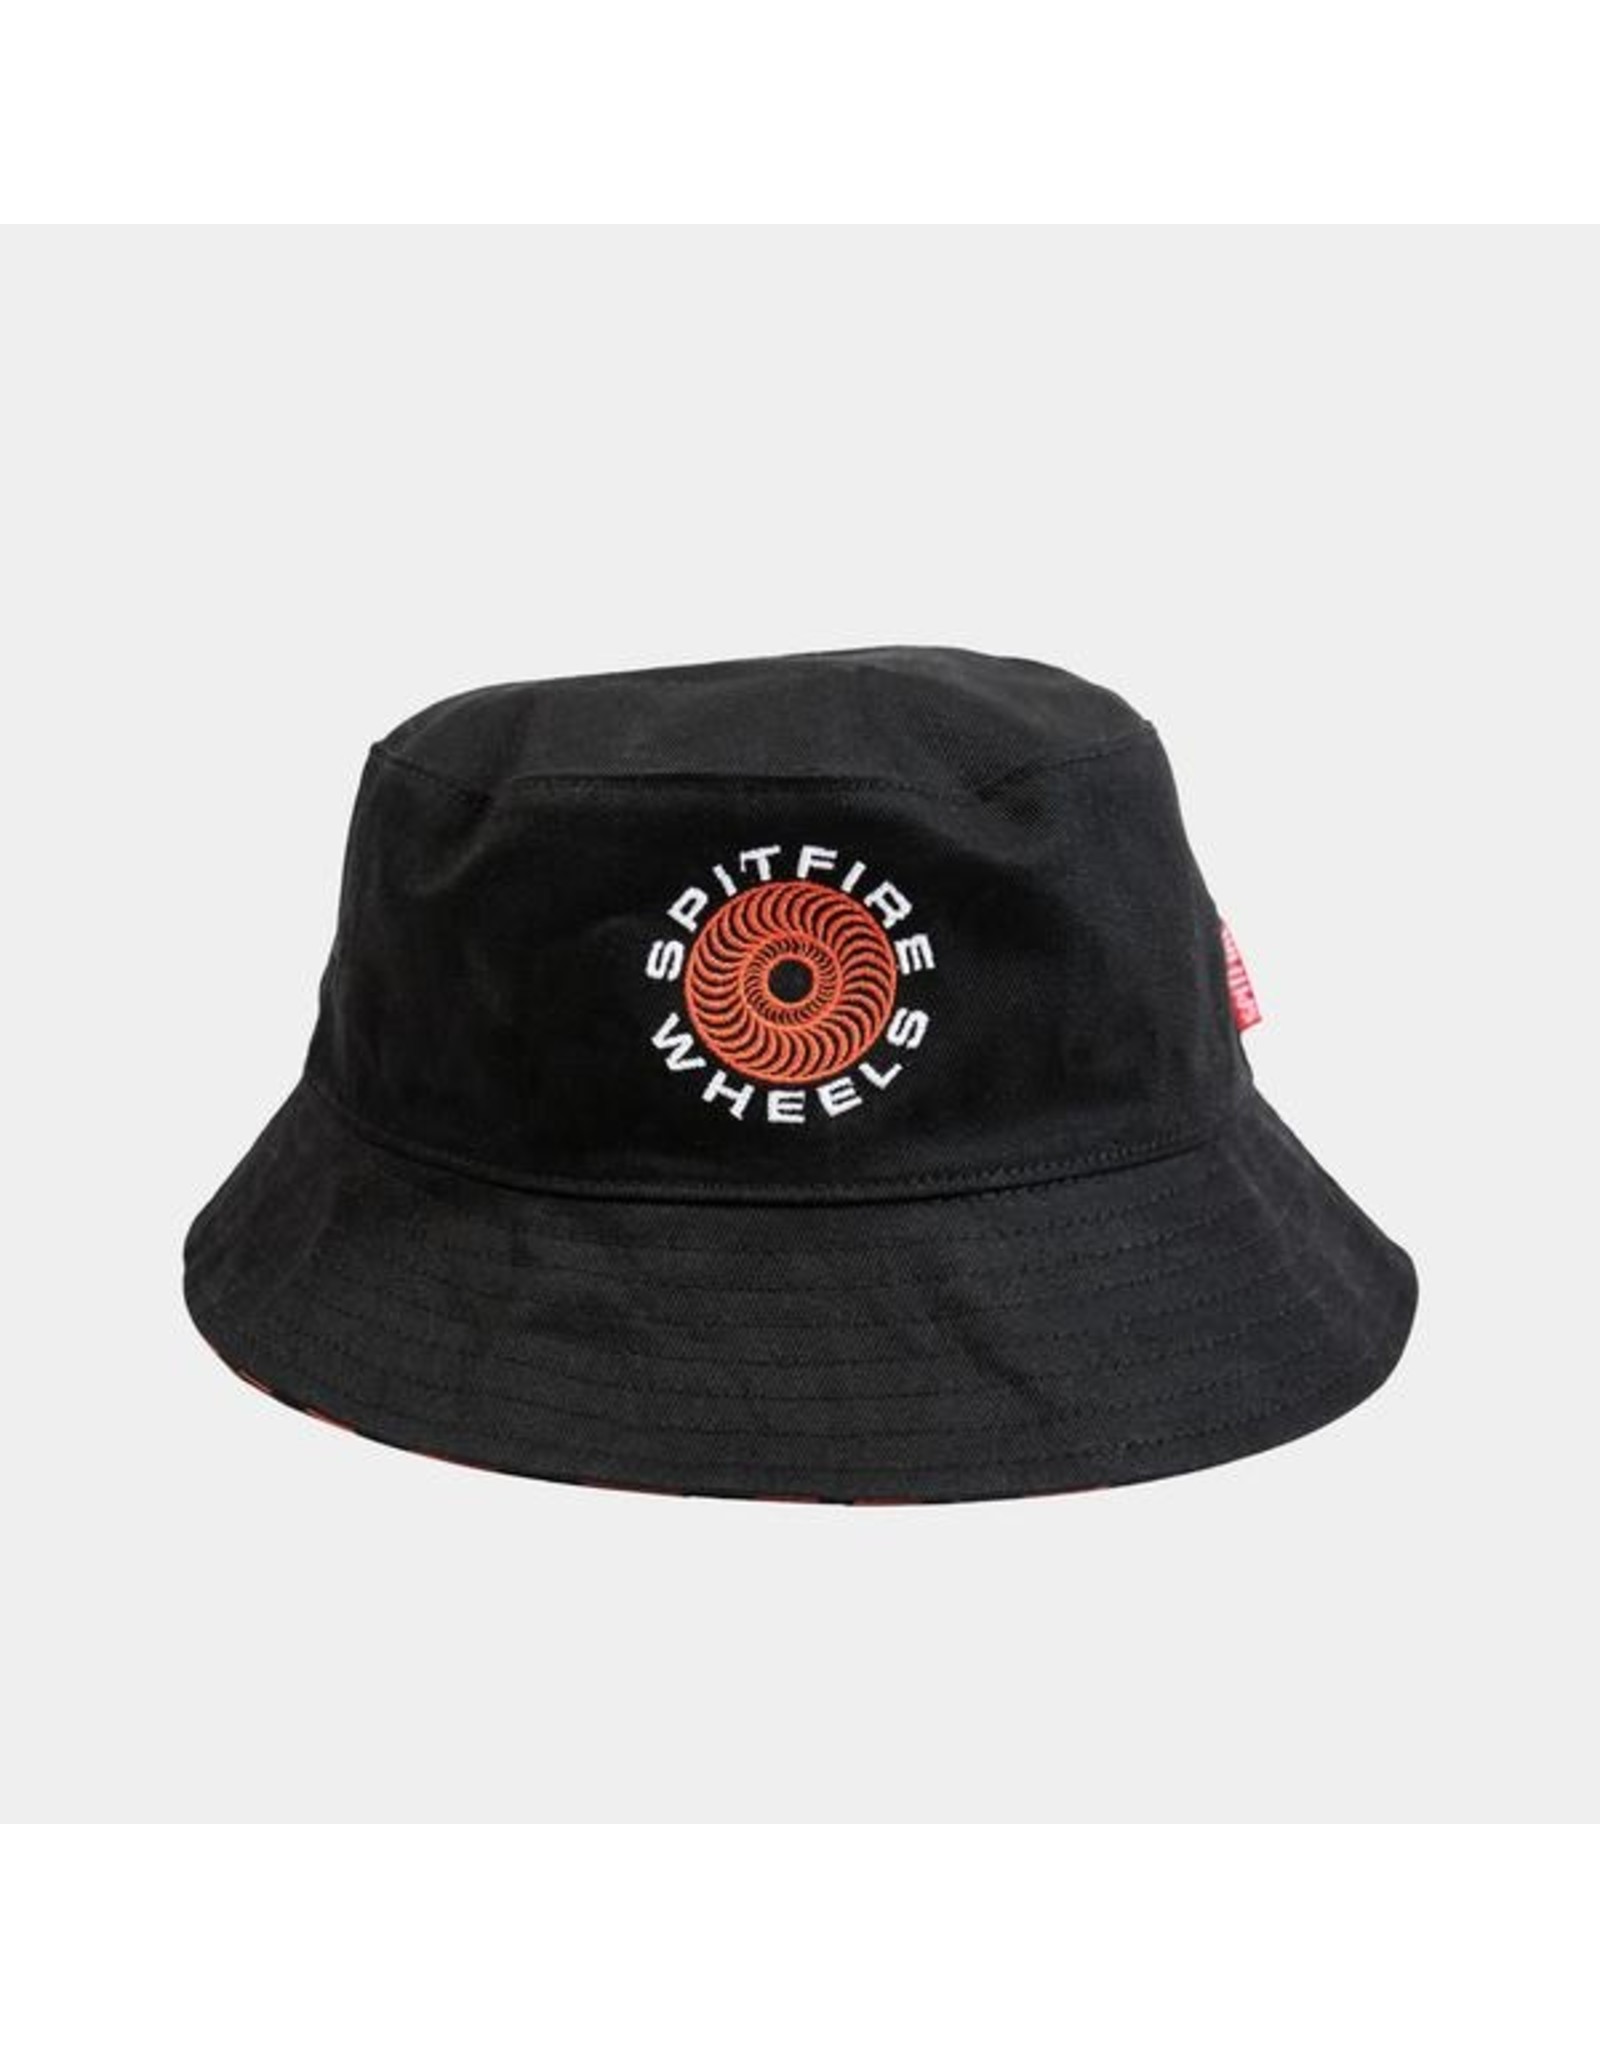 Spitfire Classic 87' Reversible Bucket Hat Black/Red O/S